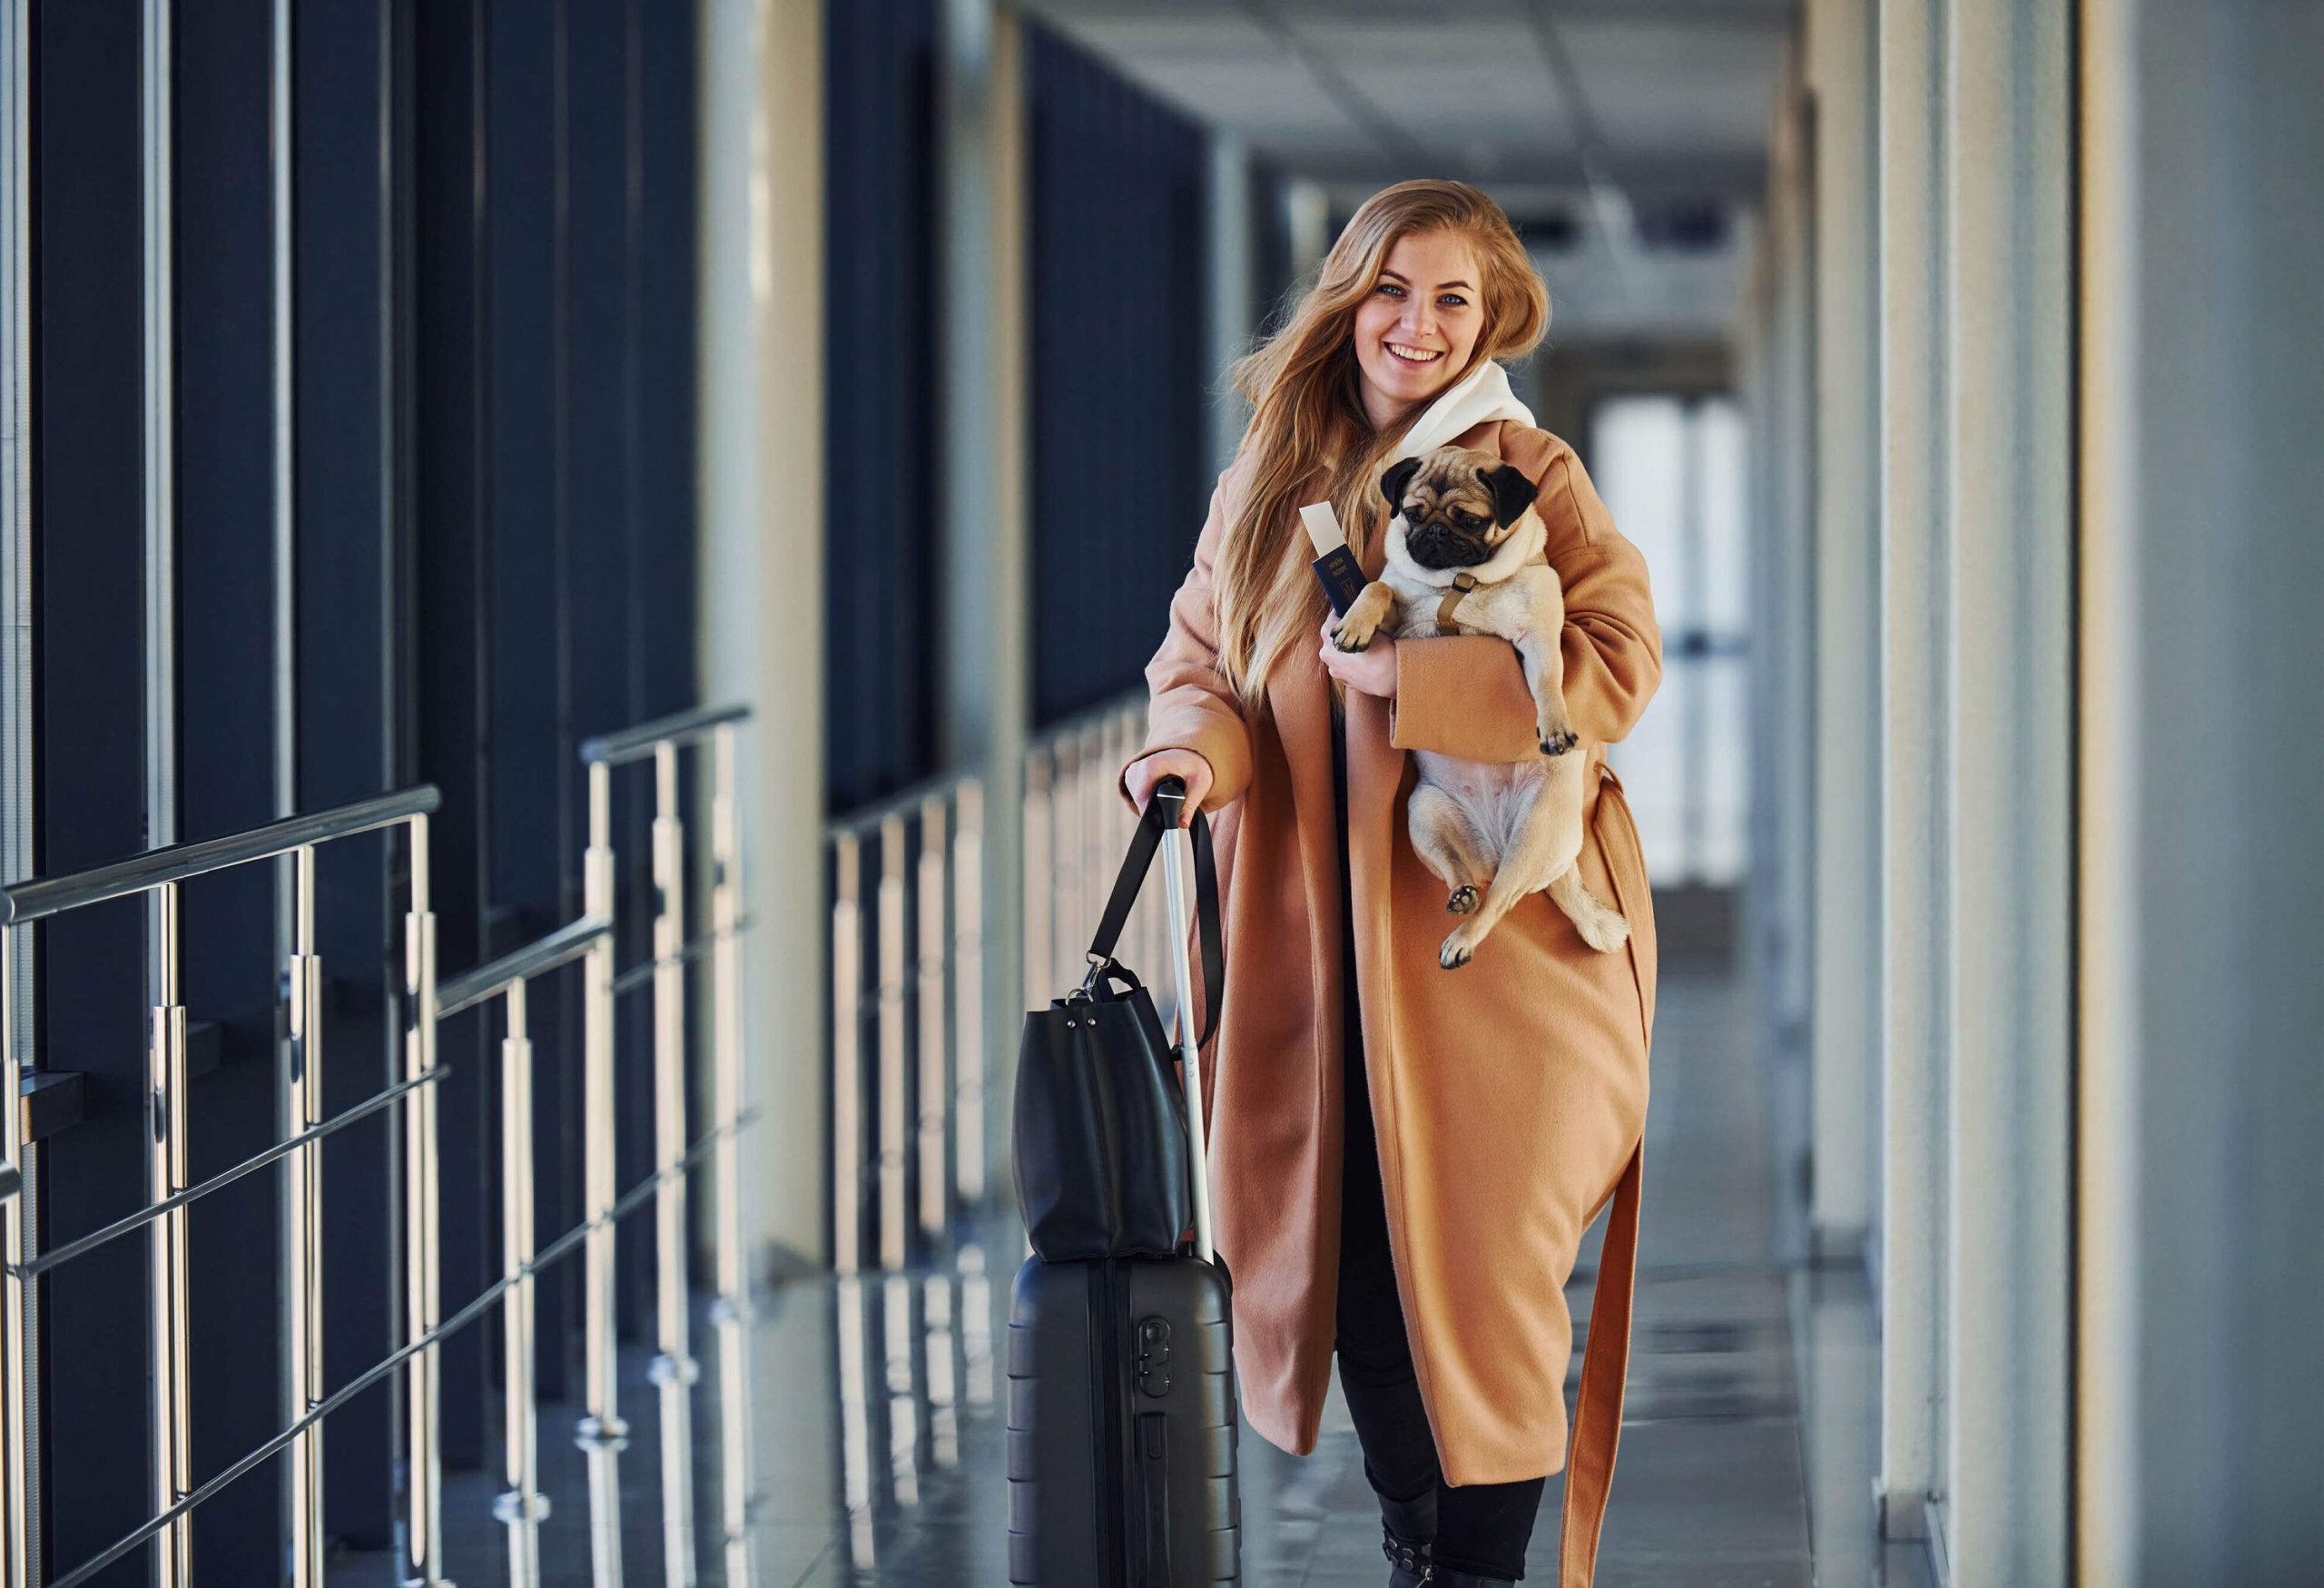 A smiling blonde woman holds her suitcase in one hand and carries her dog in the other.